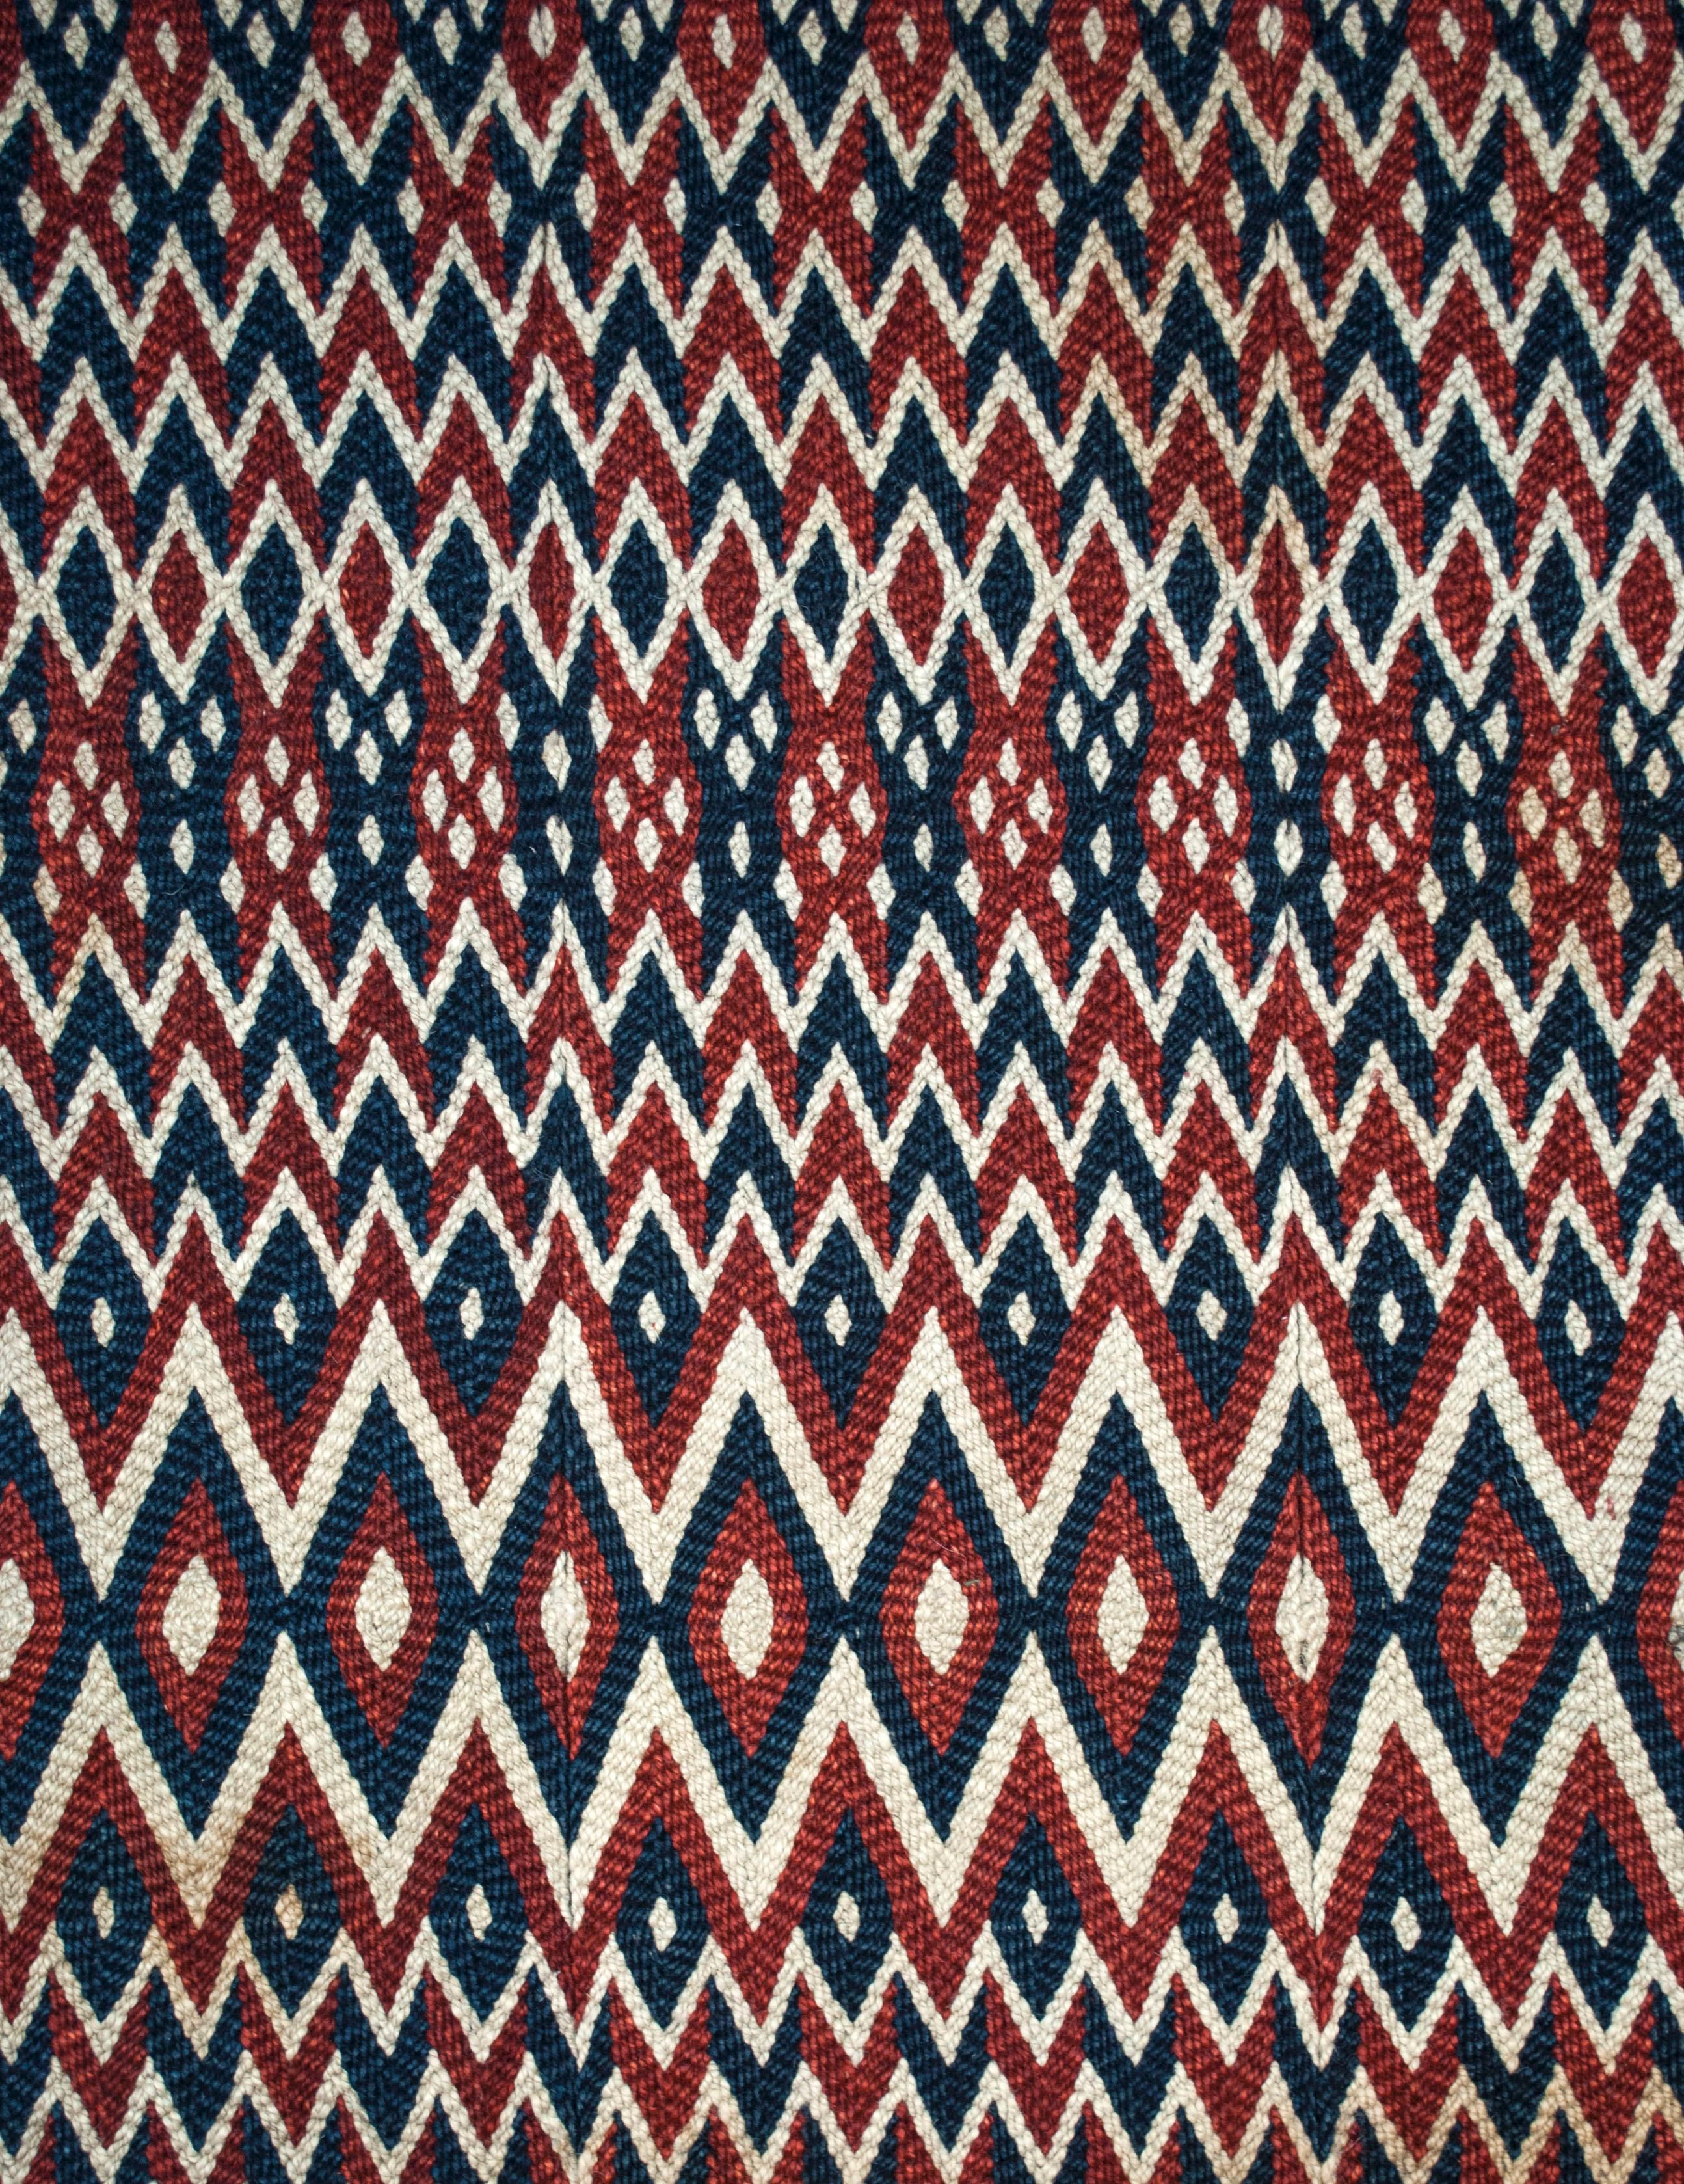 Early 20th century Tibetan horse trapping, West Tibet

This robust and graphically dazzling textile from the Tibetan plateau would have been used as either an under or over-saddle blanket. Made by nomadic herders from west Tibet using a ply-split